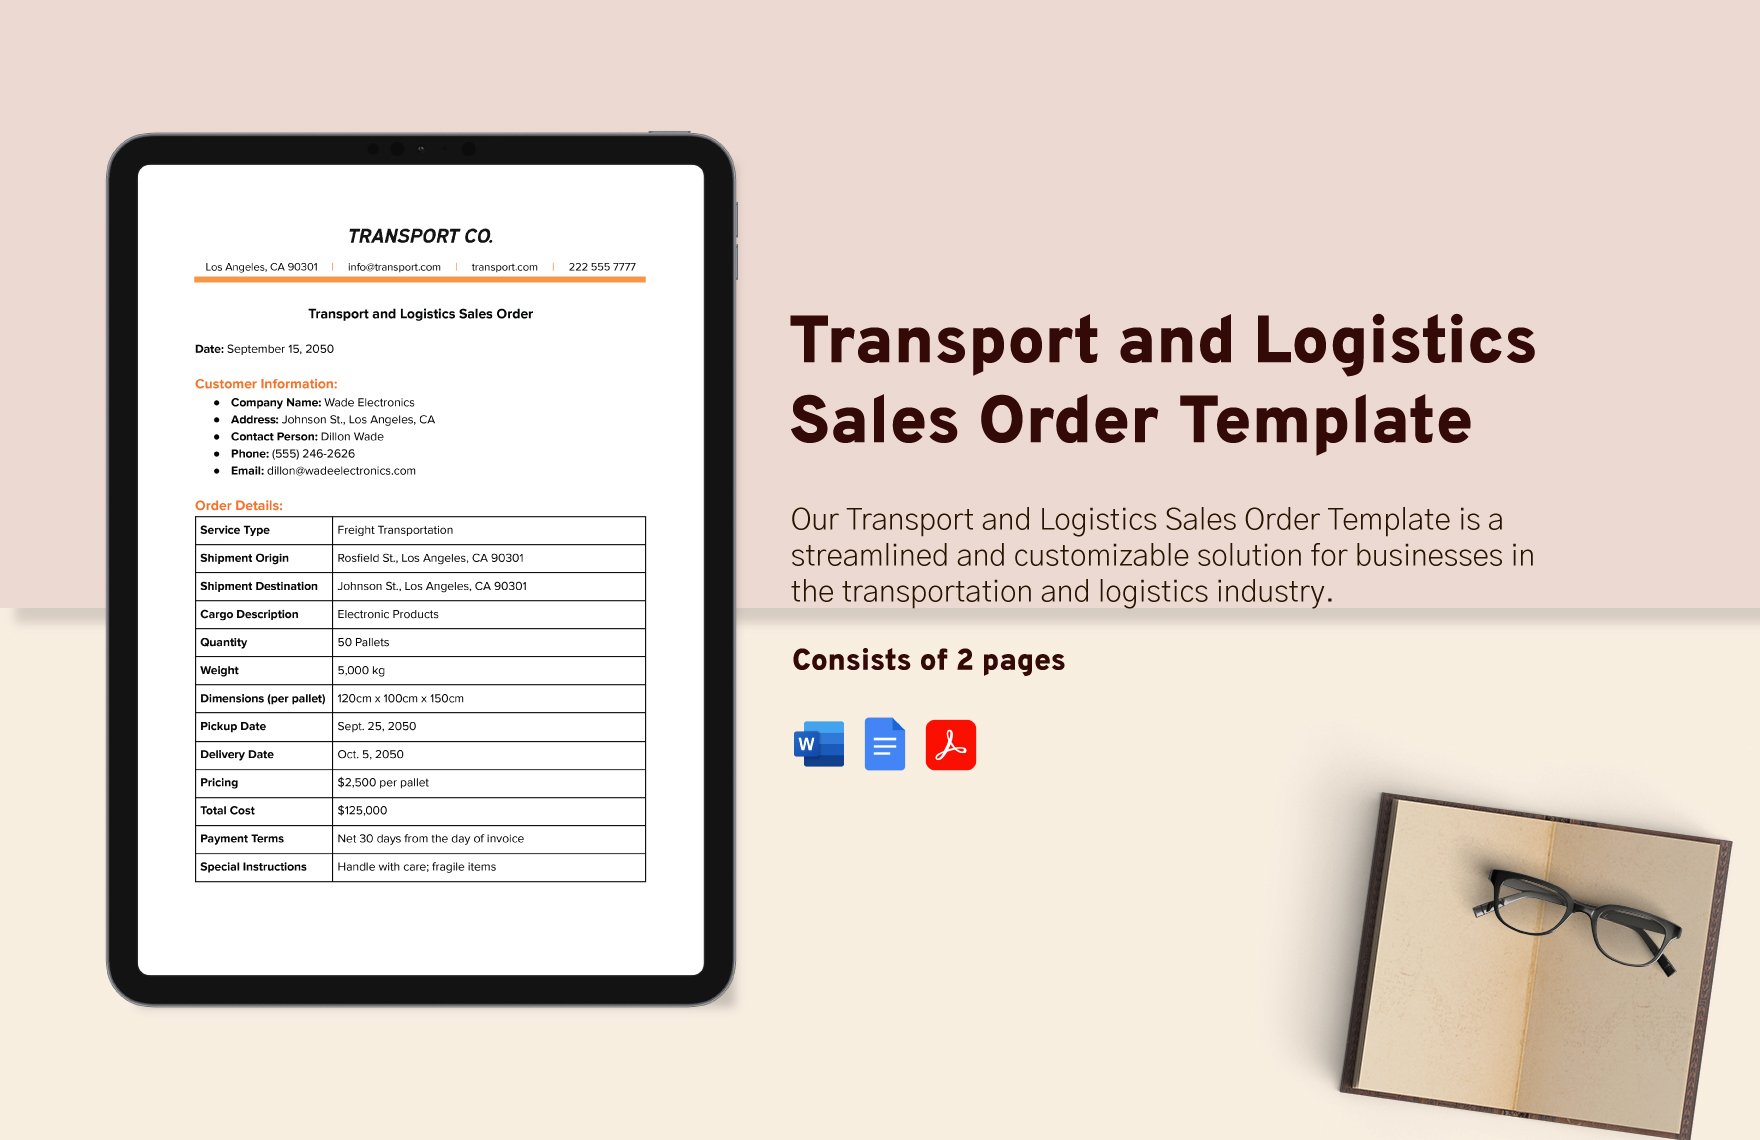 Transport and Logistics Sales Order Template